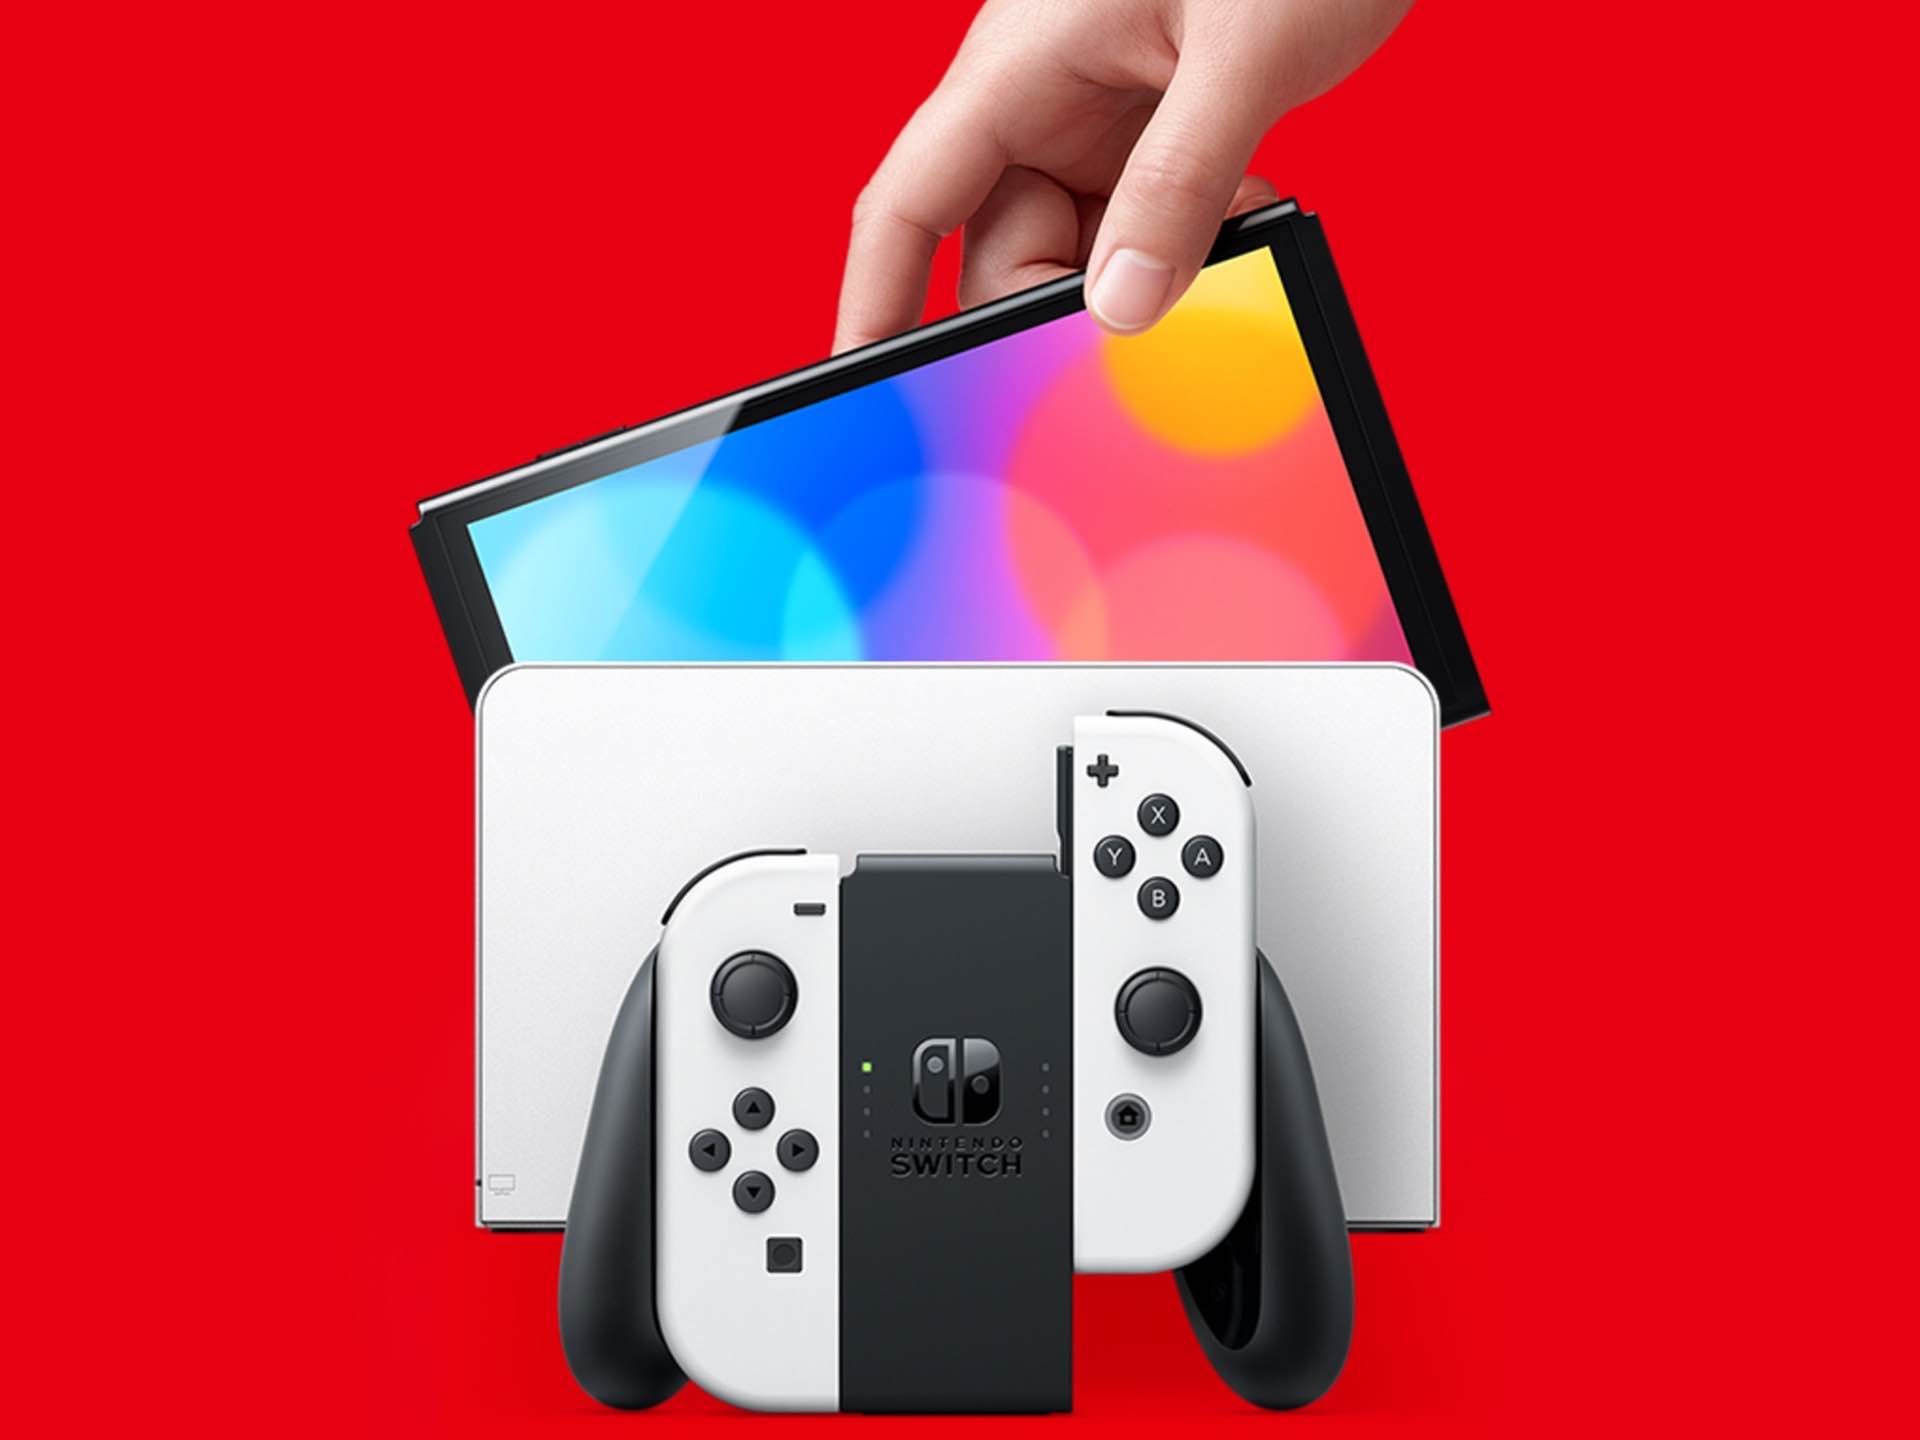 The new OLED-edition Nintendo Switch portable game console. ($350, available in white and classic neon blue + red)